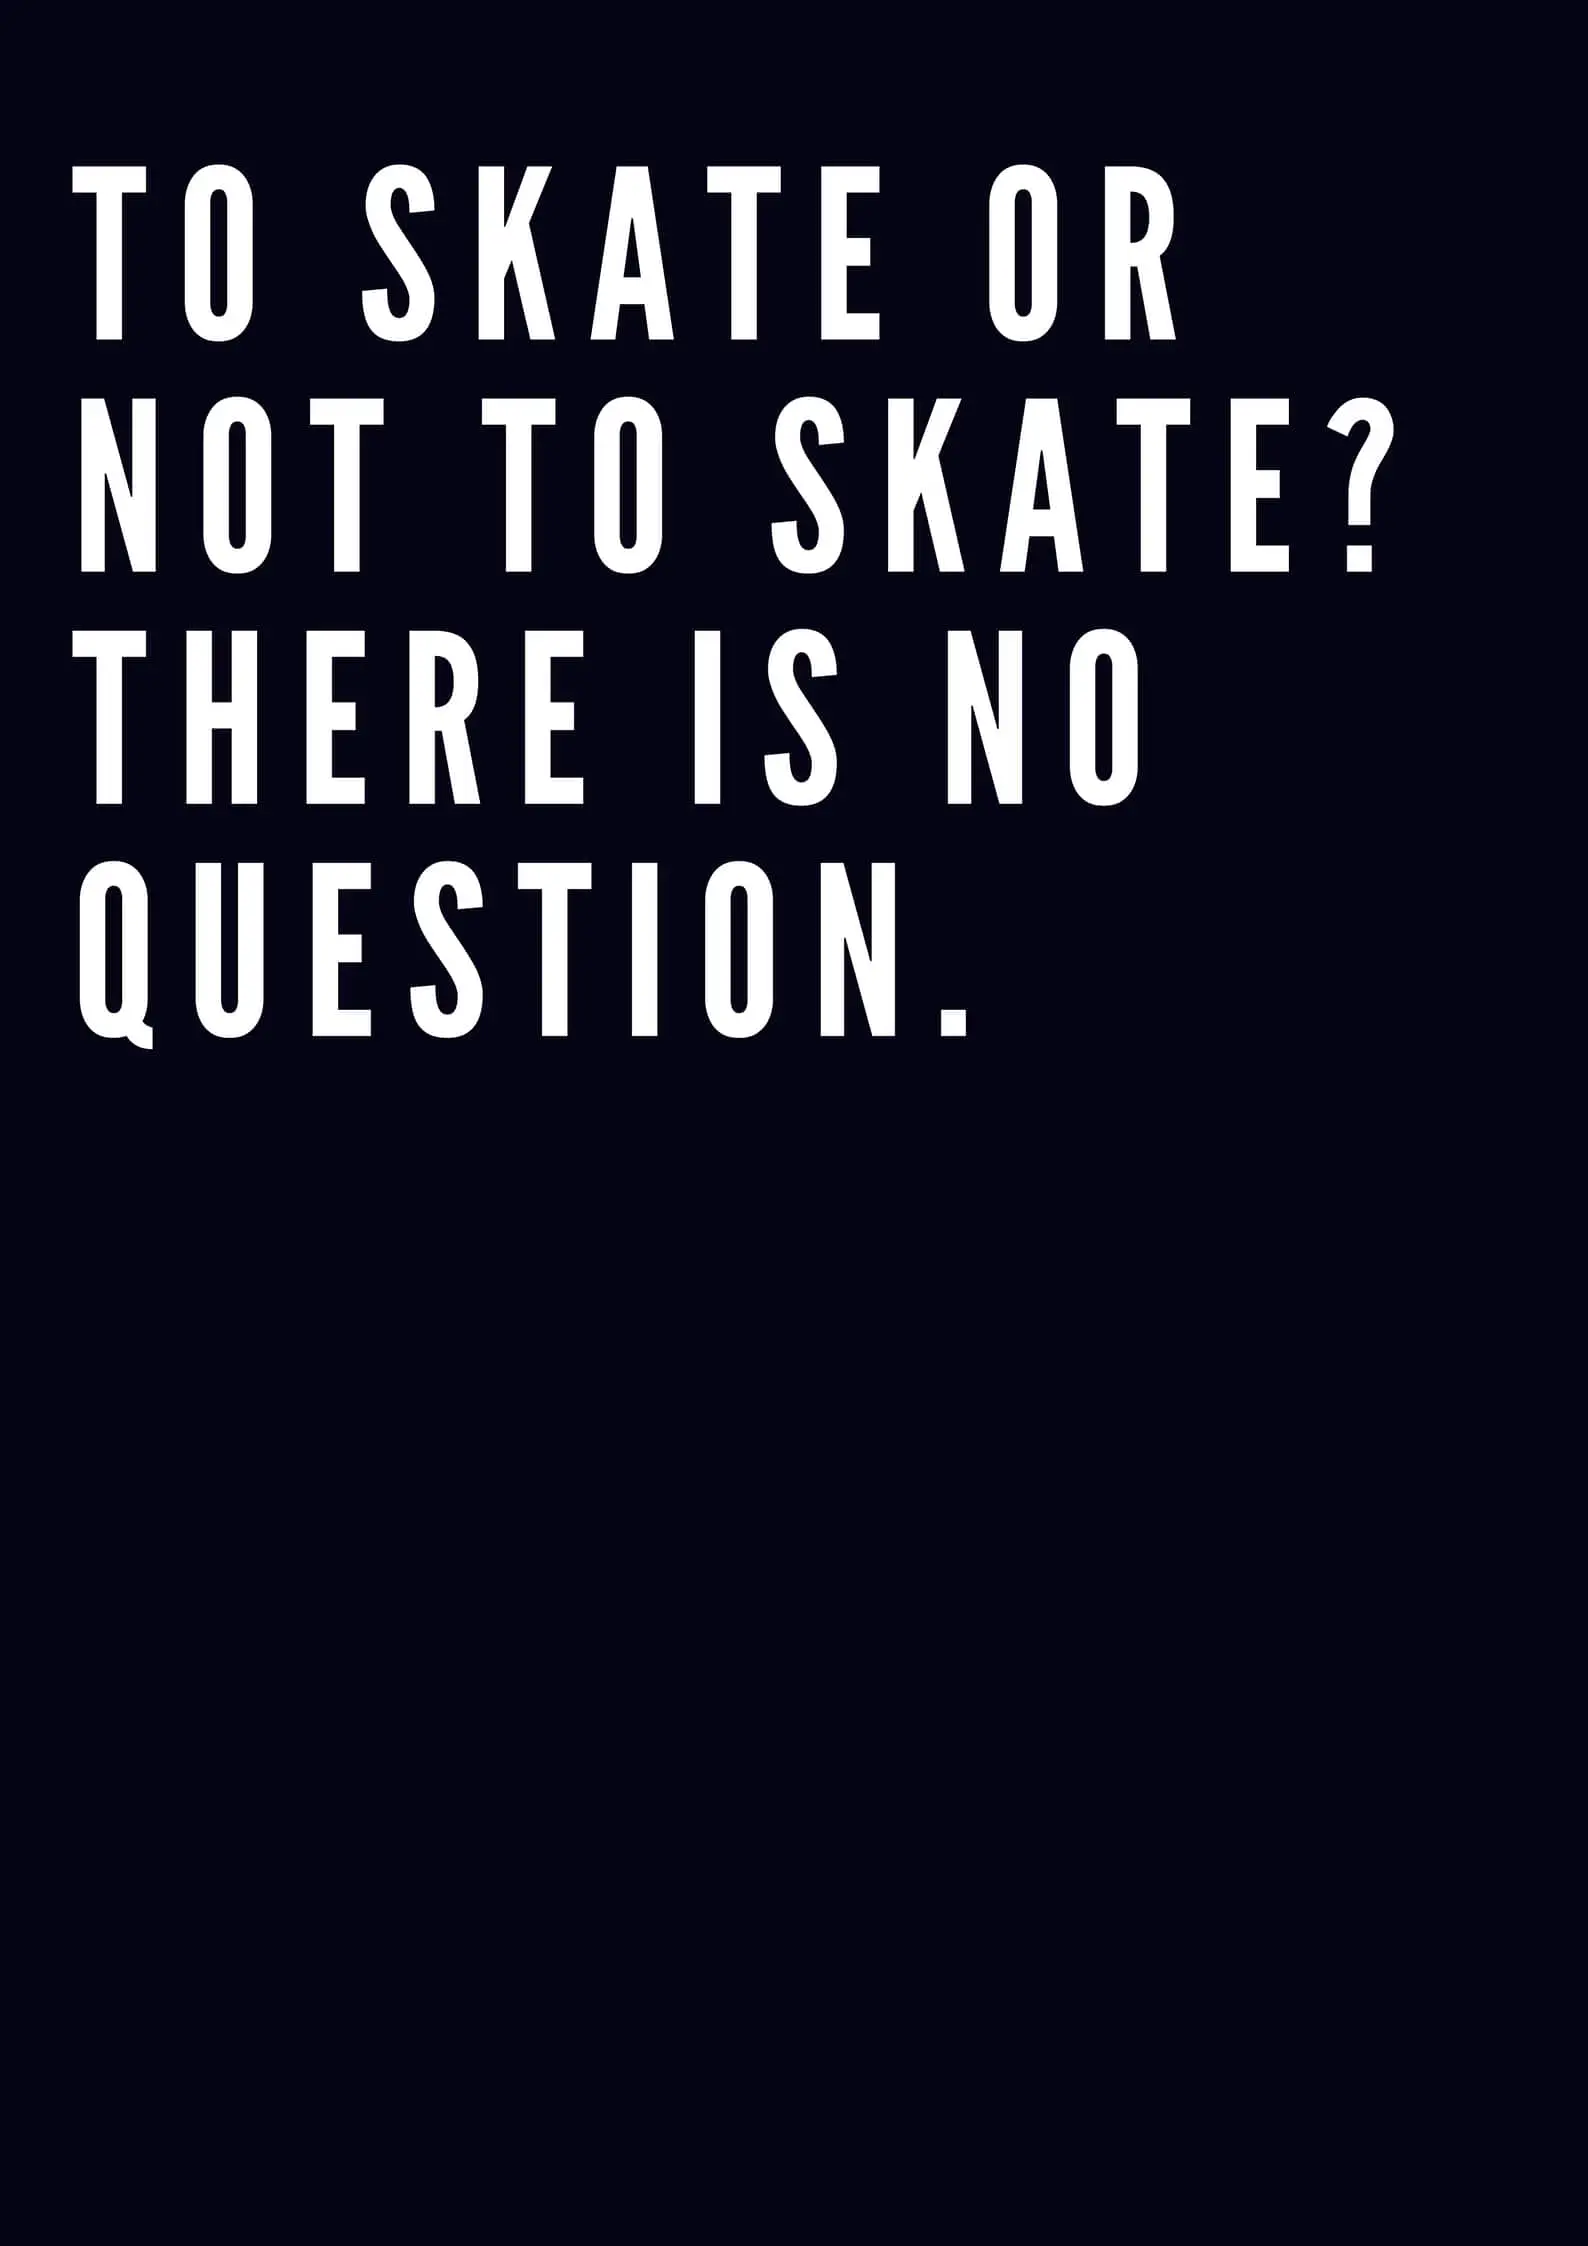 To skate or not to skate_ There is no question.